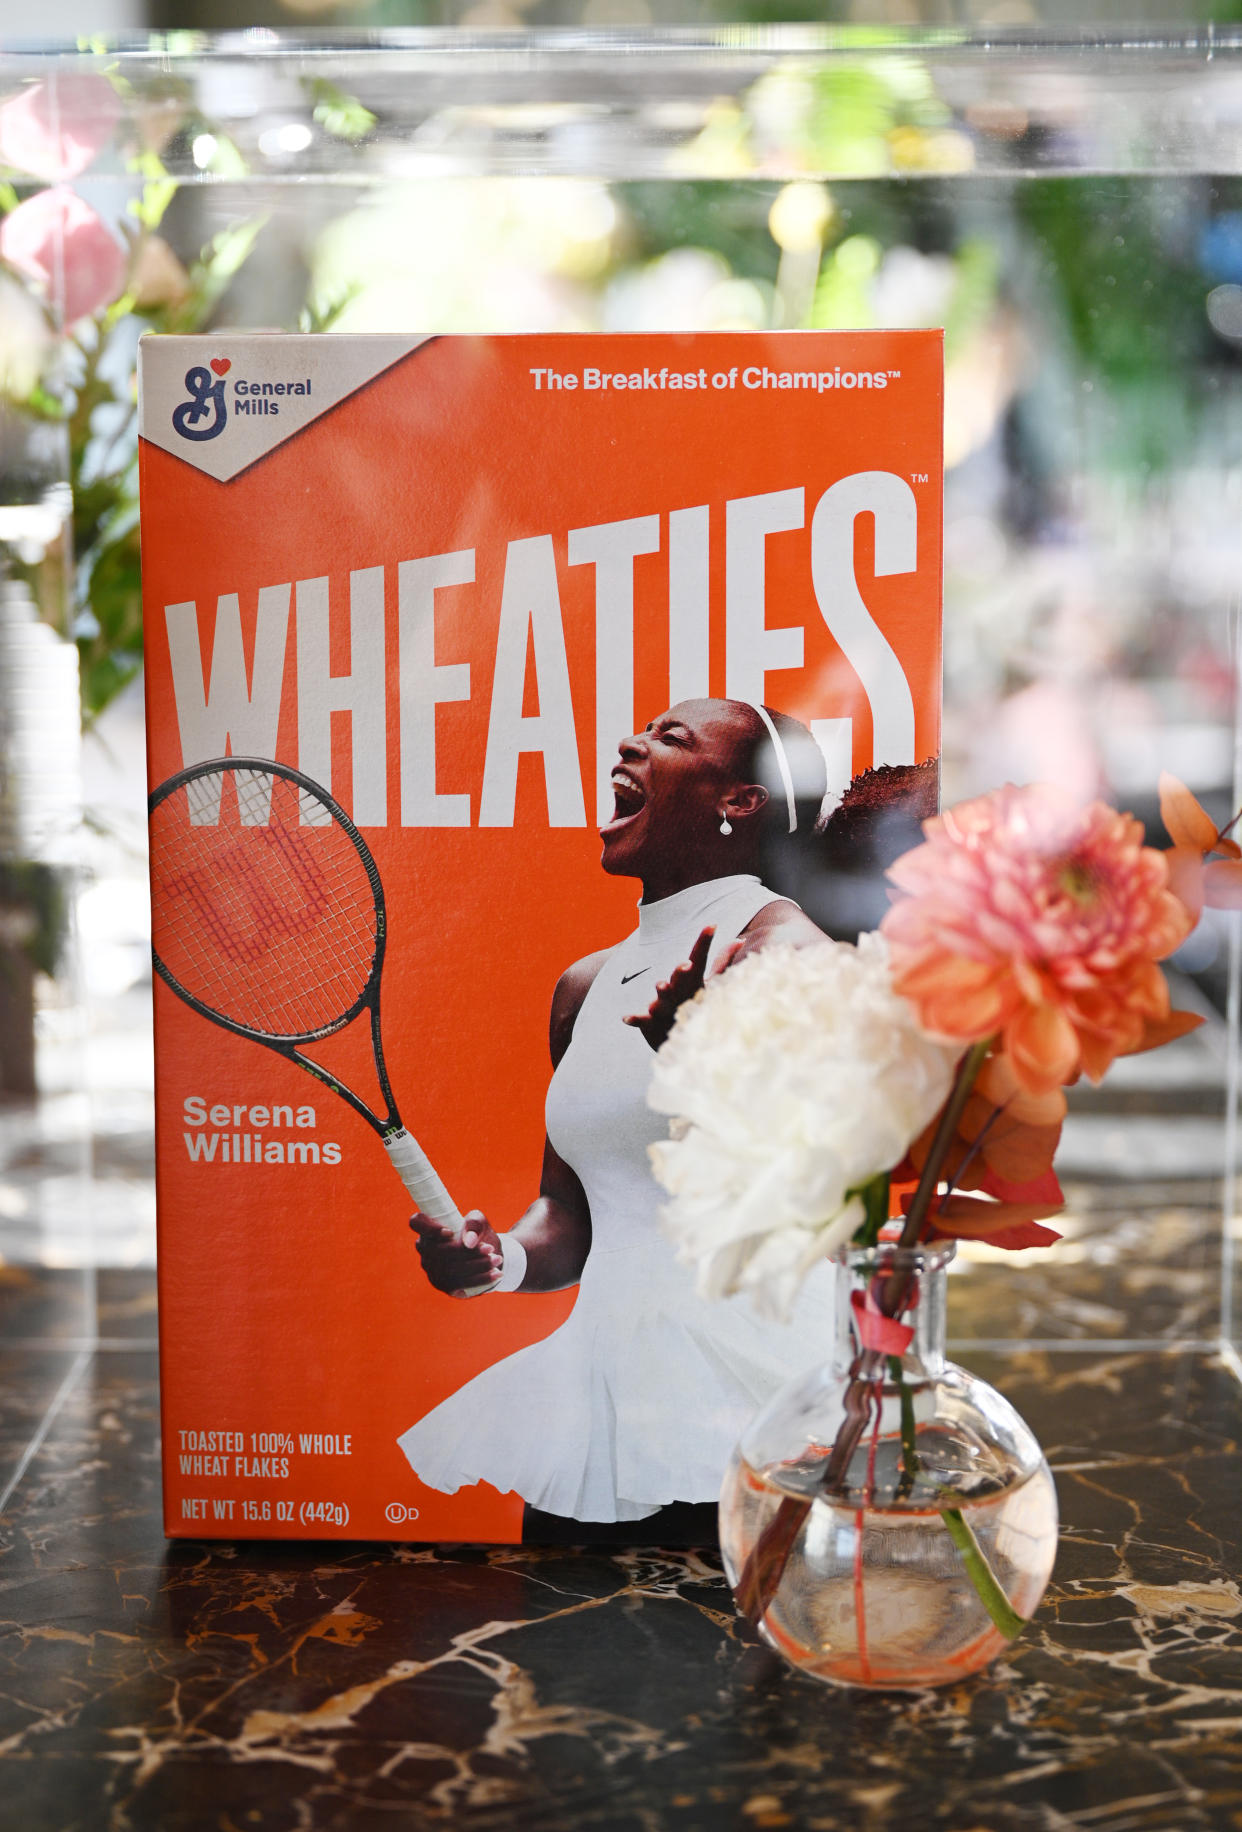 NEW YORK, NEW YORK - SEPTEMBER 09: A view of the Serena Williams Wheaties box on display at 'Breakfast of Champions' presented by Wheaties during NYFW: The Shows at Spring Studios on September 09, 2019 in New York City. (Photo by Bryan Bedder/Getty Images for IMG)